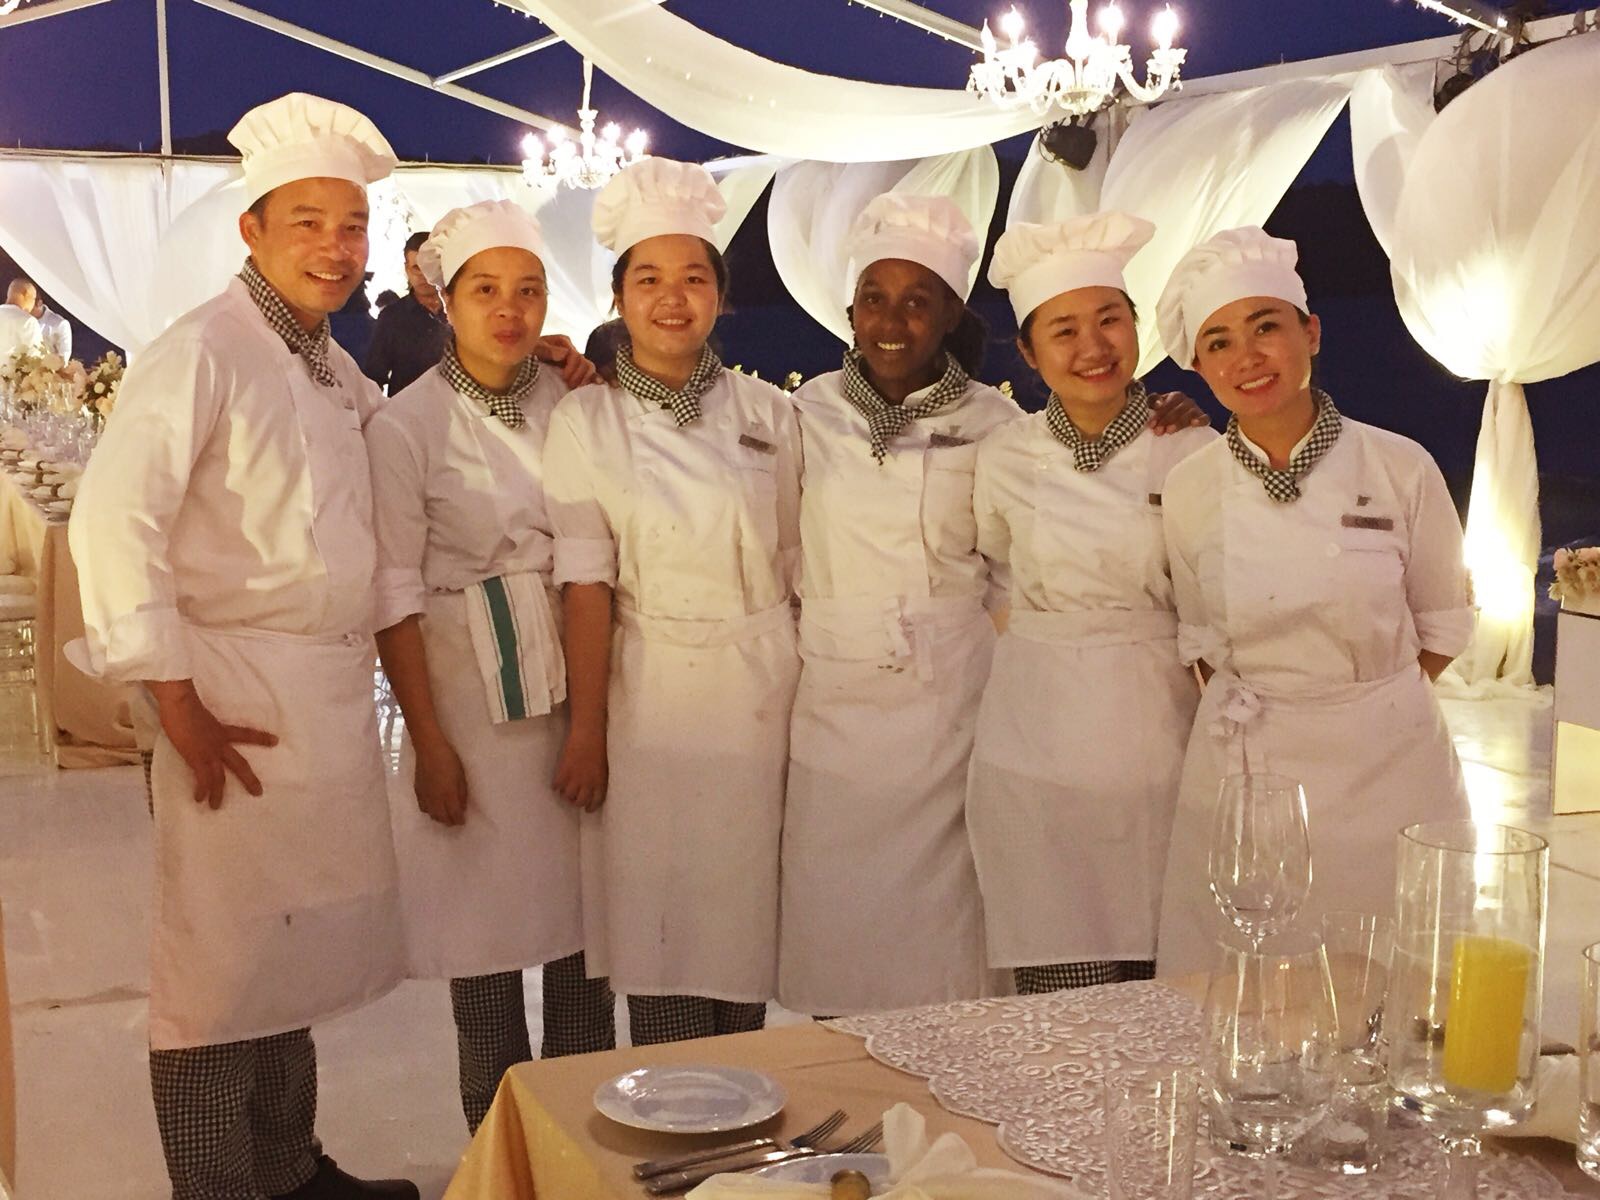 Culinary Arts student on work placement at JW Marriott in Vietnam - Placement Year International